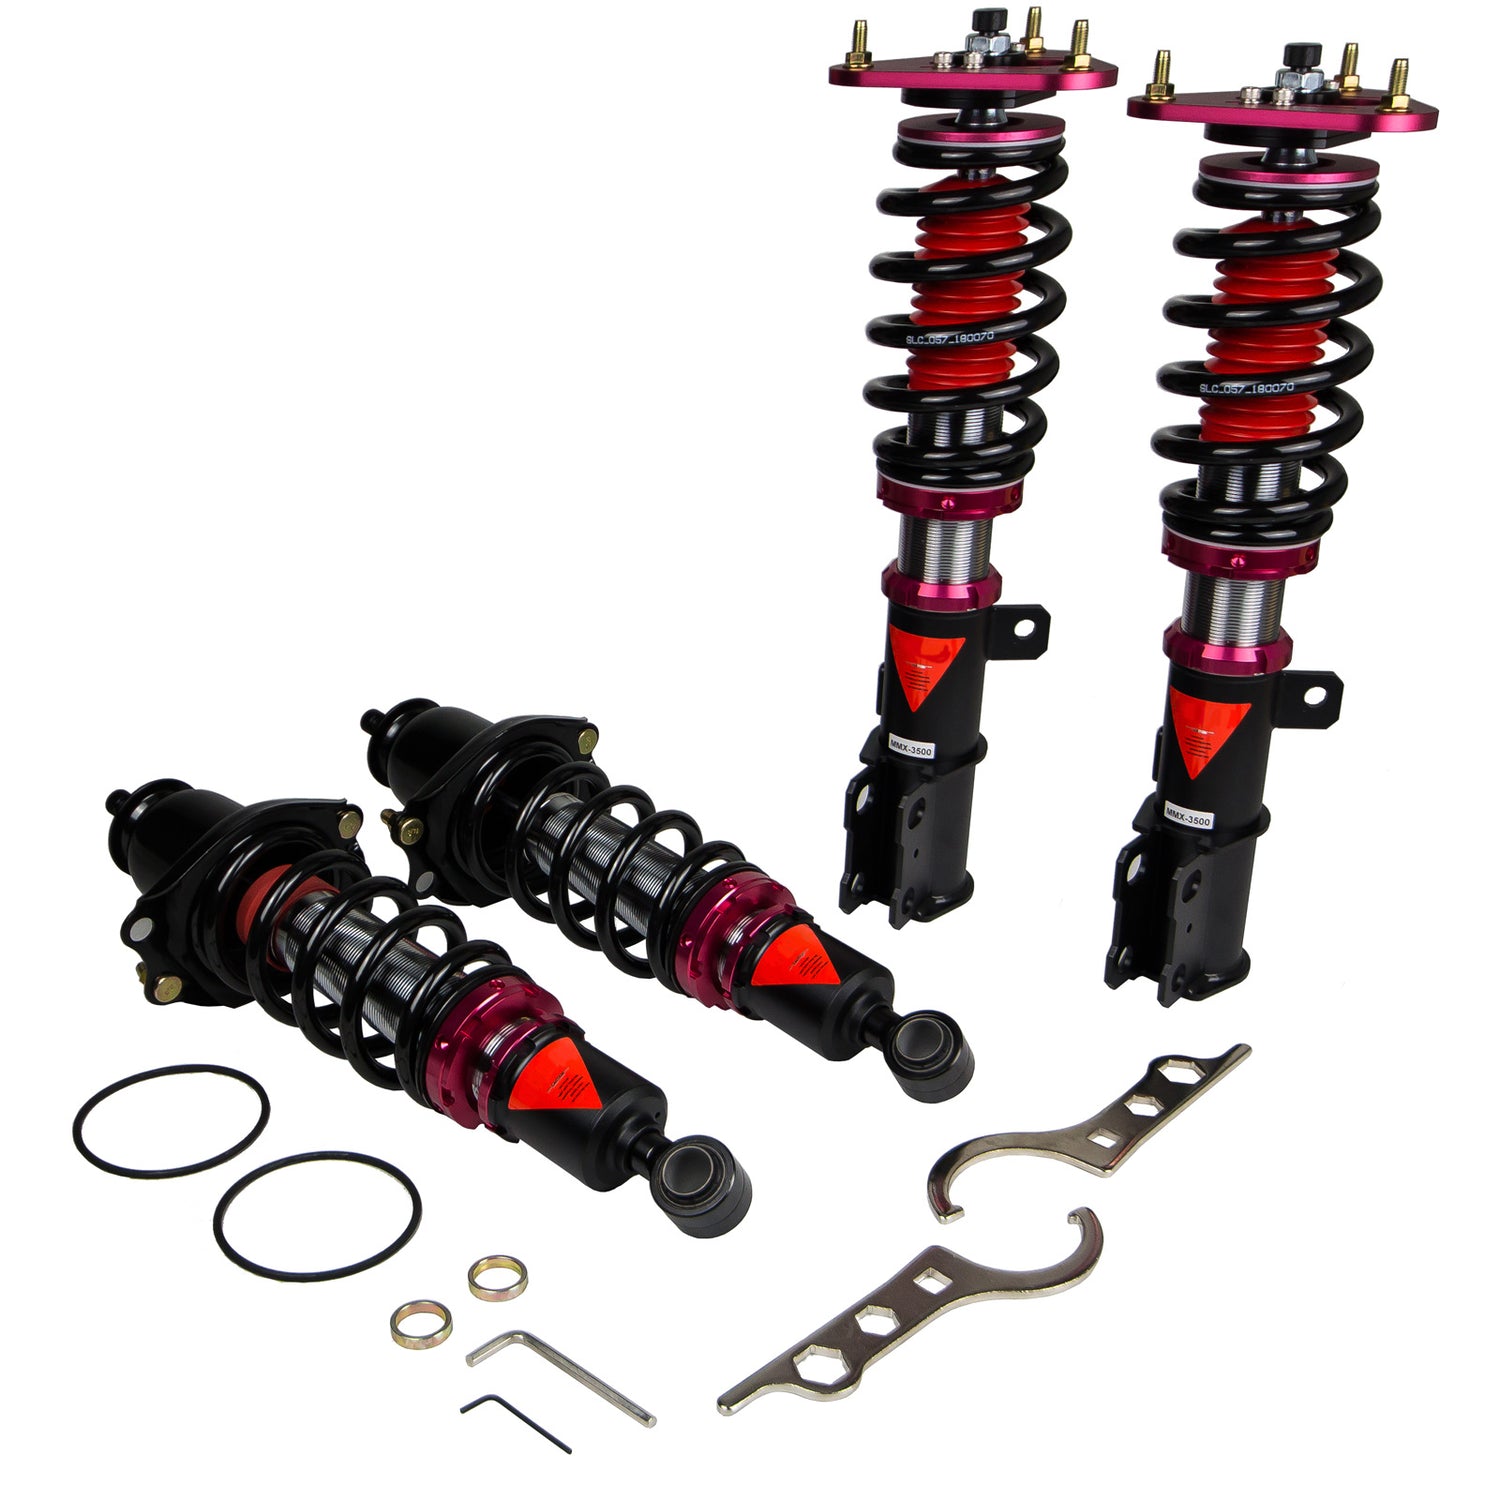 MMX3500-B MAXX Coilovers Lowering Kit, Fully Adjustable, Ride Height, 40 Clicks Rebound Settings, Toyota Matrix(E140) Base 1.8L 2009-13